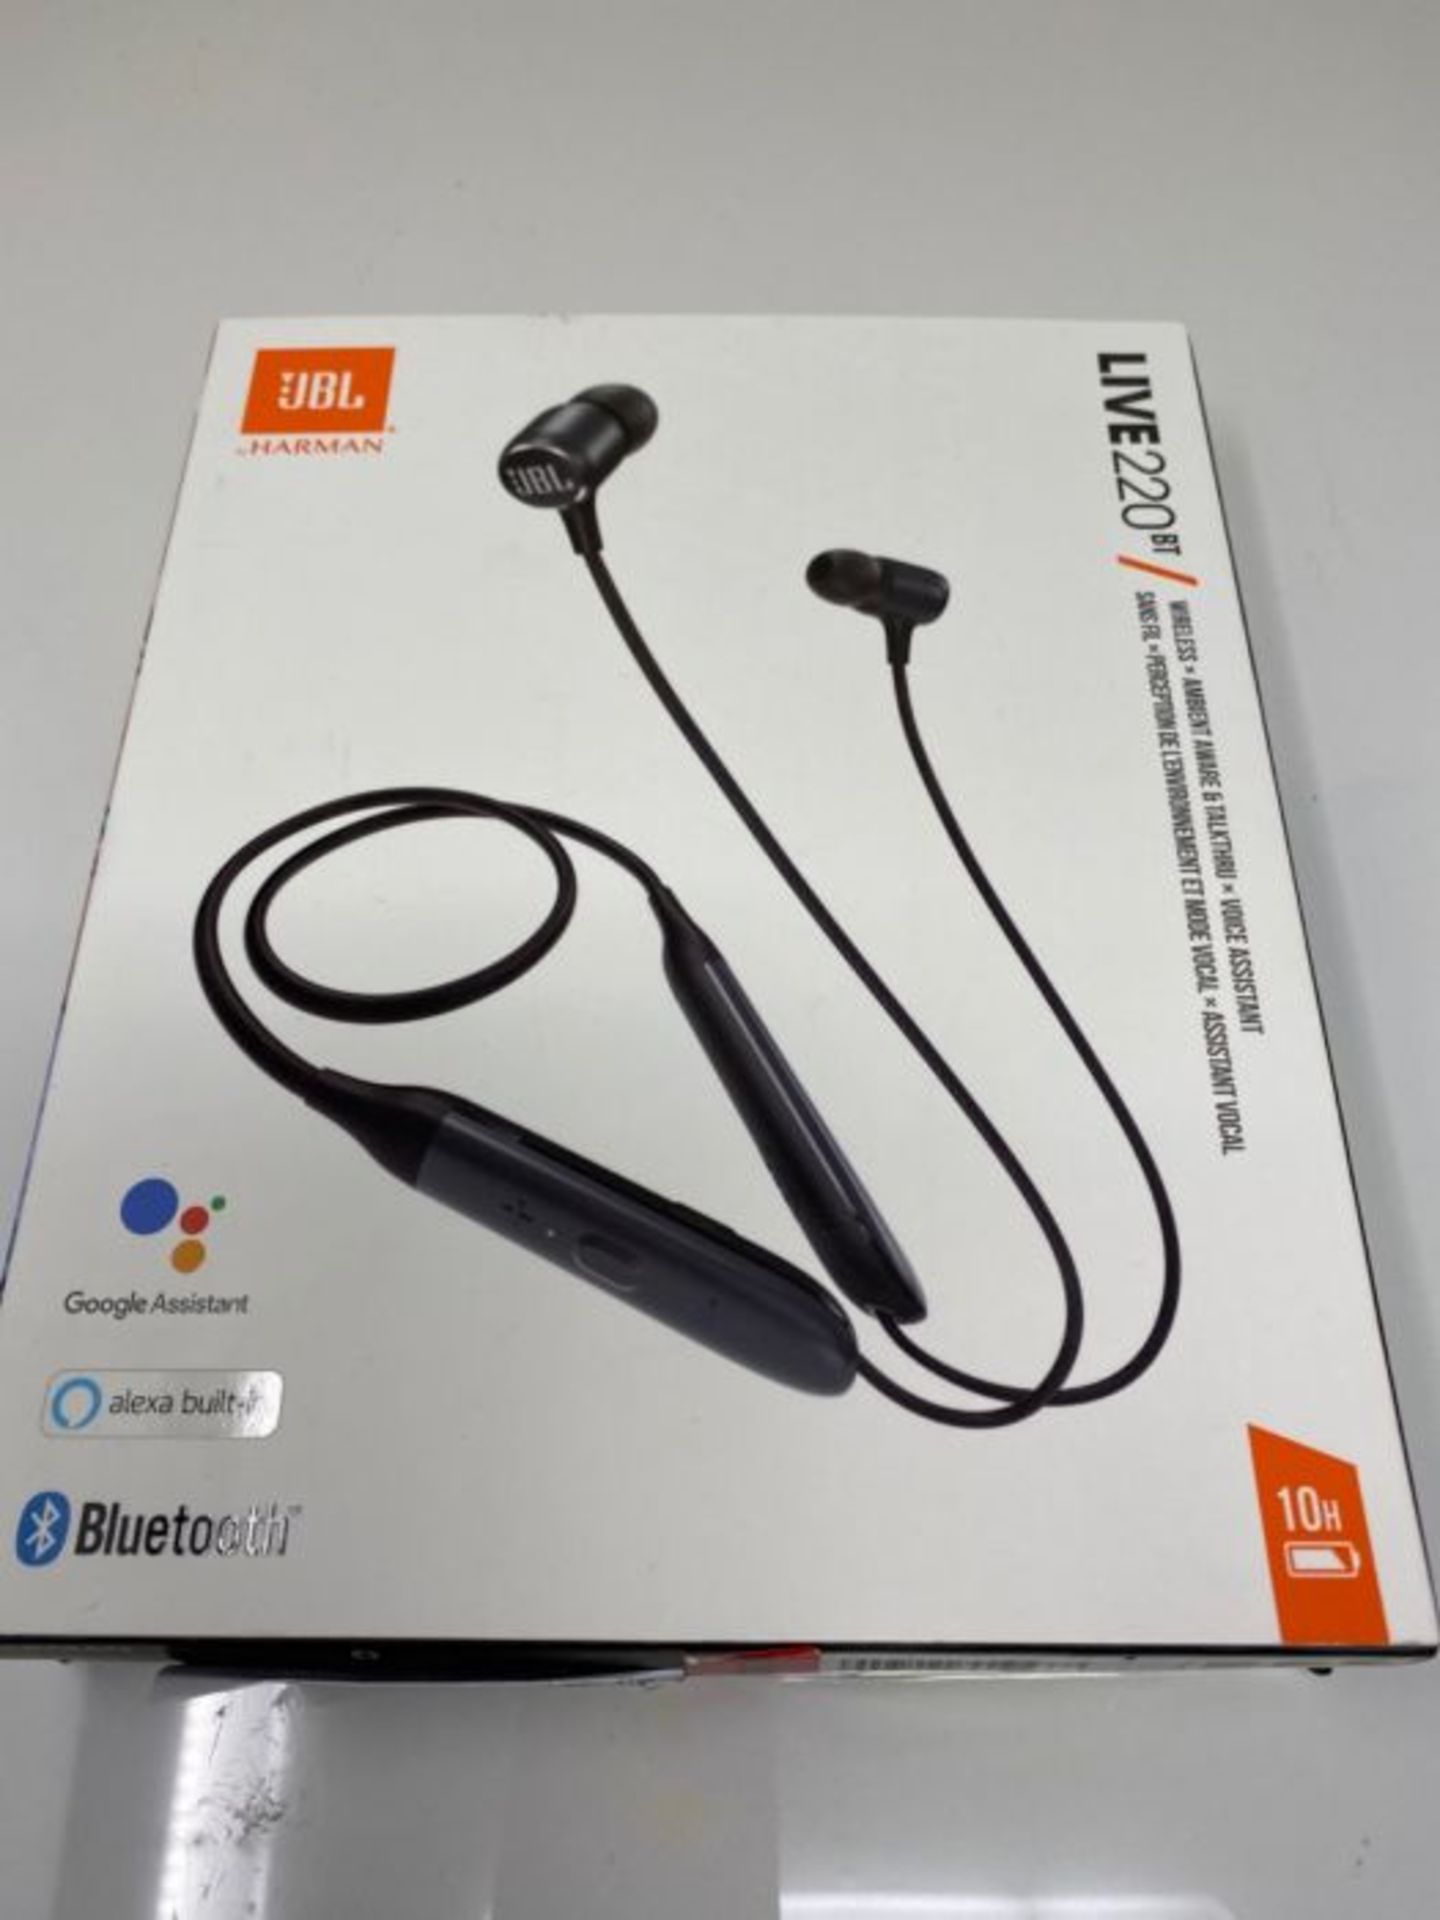 JBL LIVE 220BT Wireless In-Ear Headphones with Alexa built-in, Google Assistant and Bl - Image 2 of 3